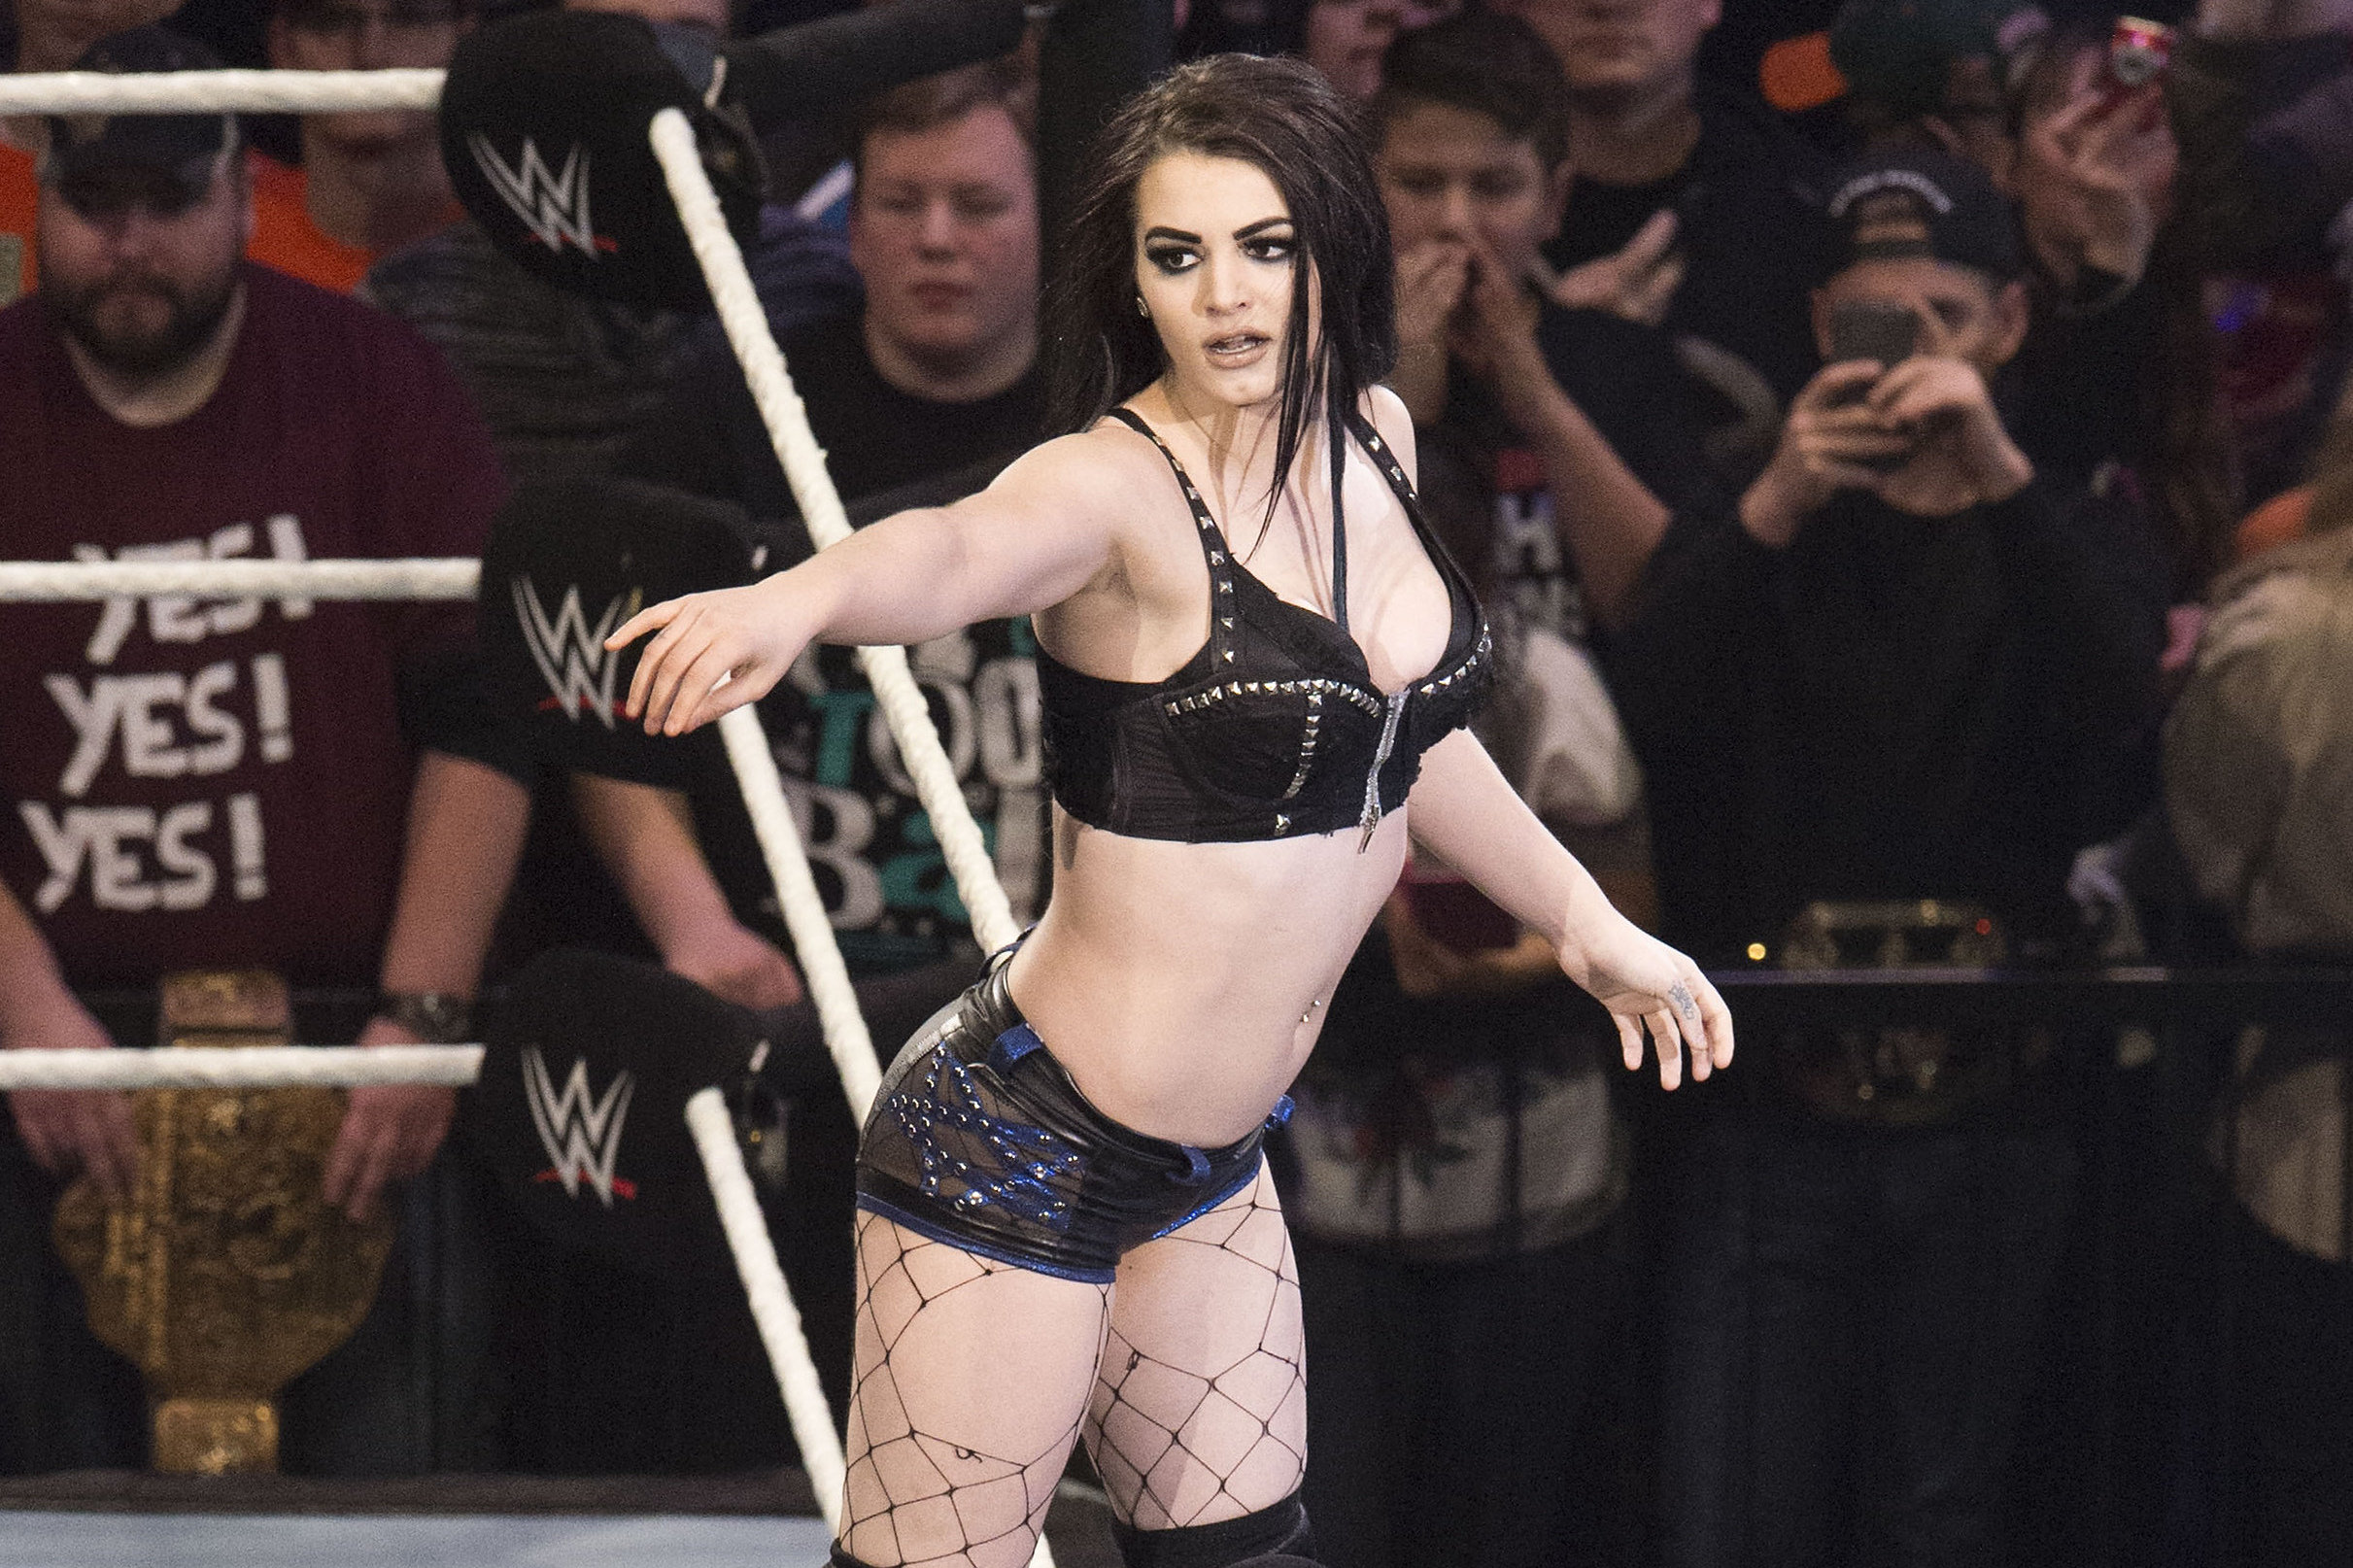 Paige hasn’t been used on live WWE TV since 2019.